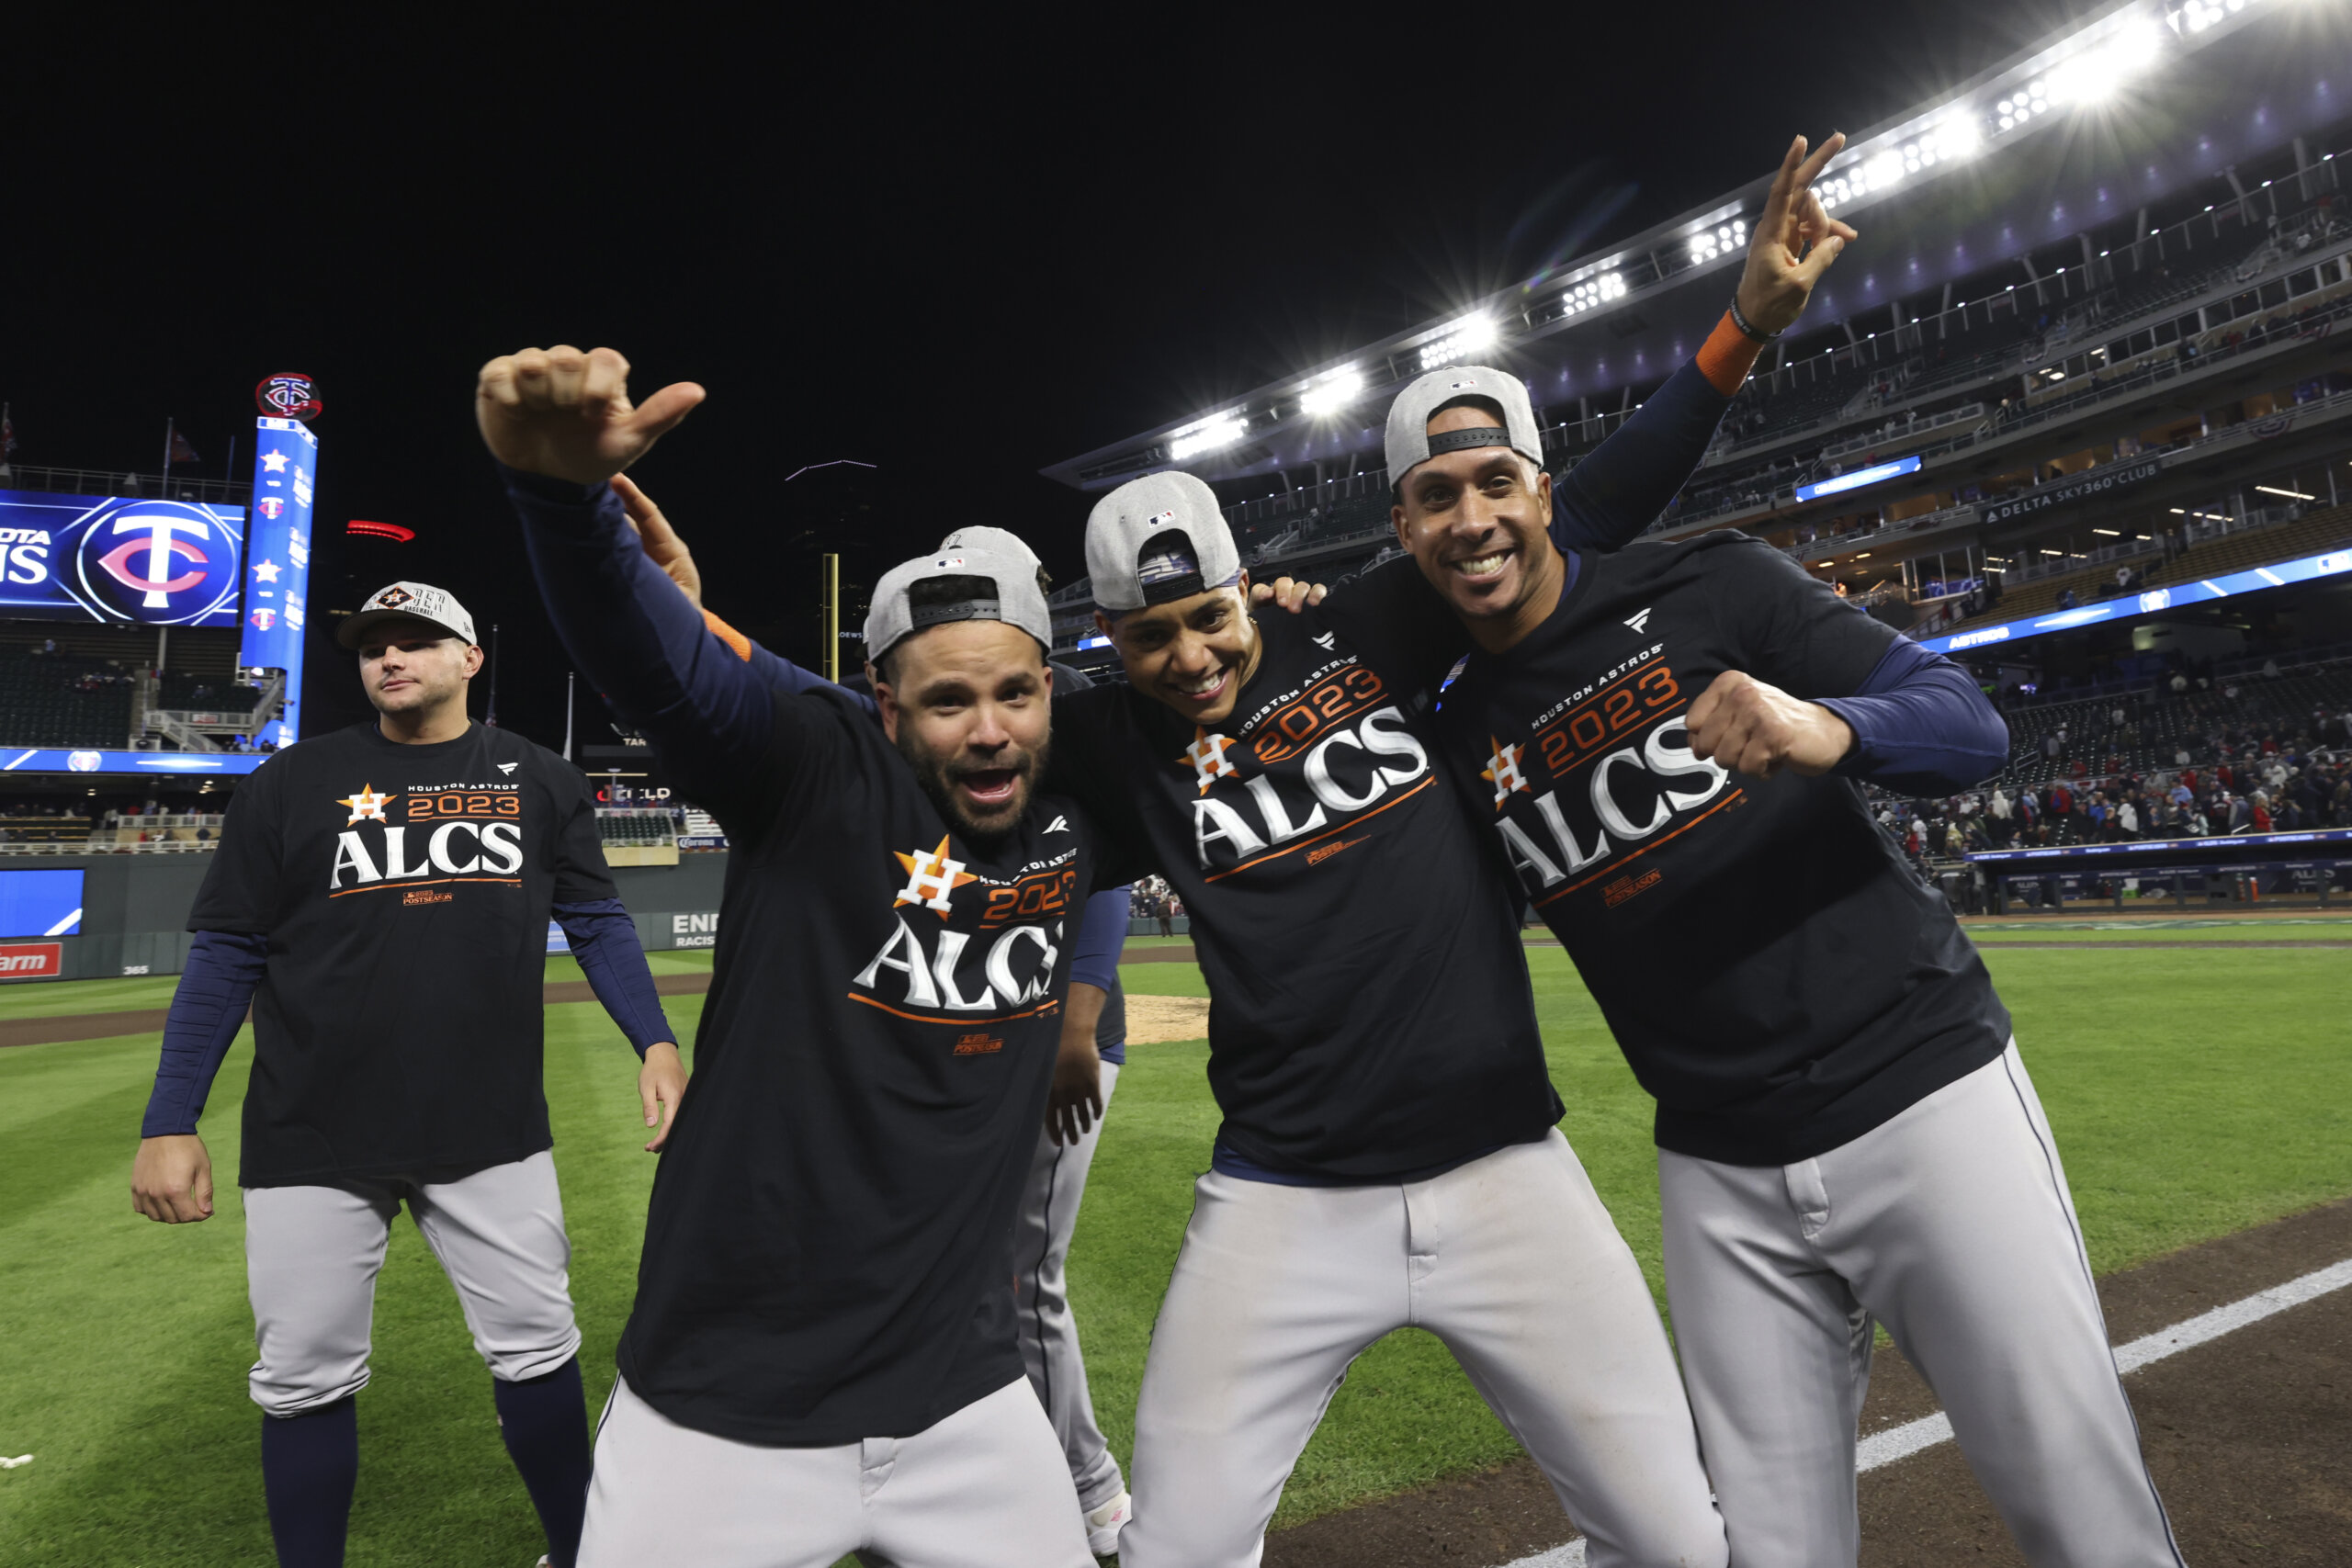 José Abreu homers again to power the Astros past the Twins 3-2 and into  their 7th straight ALCS